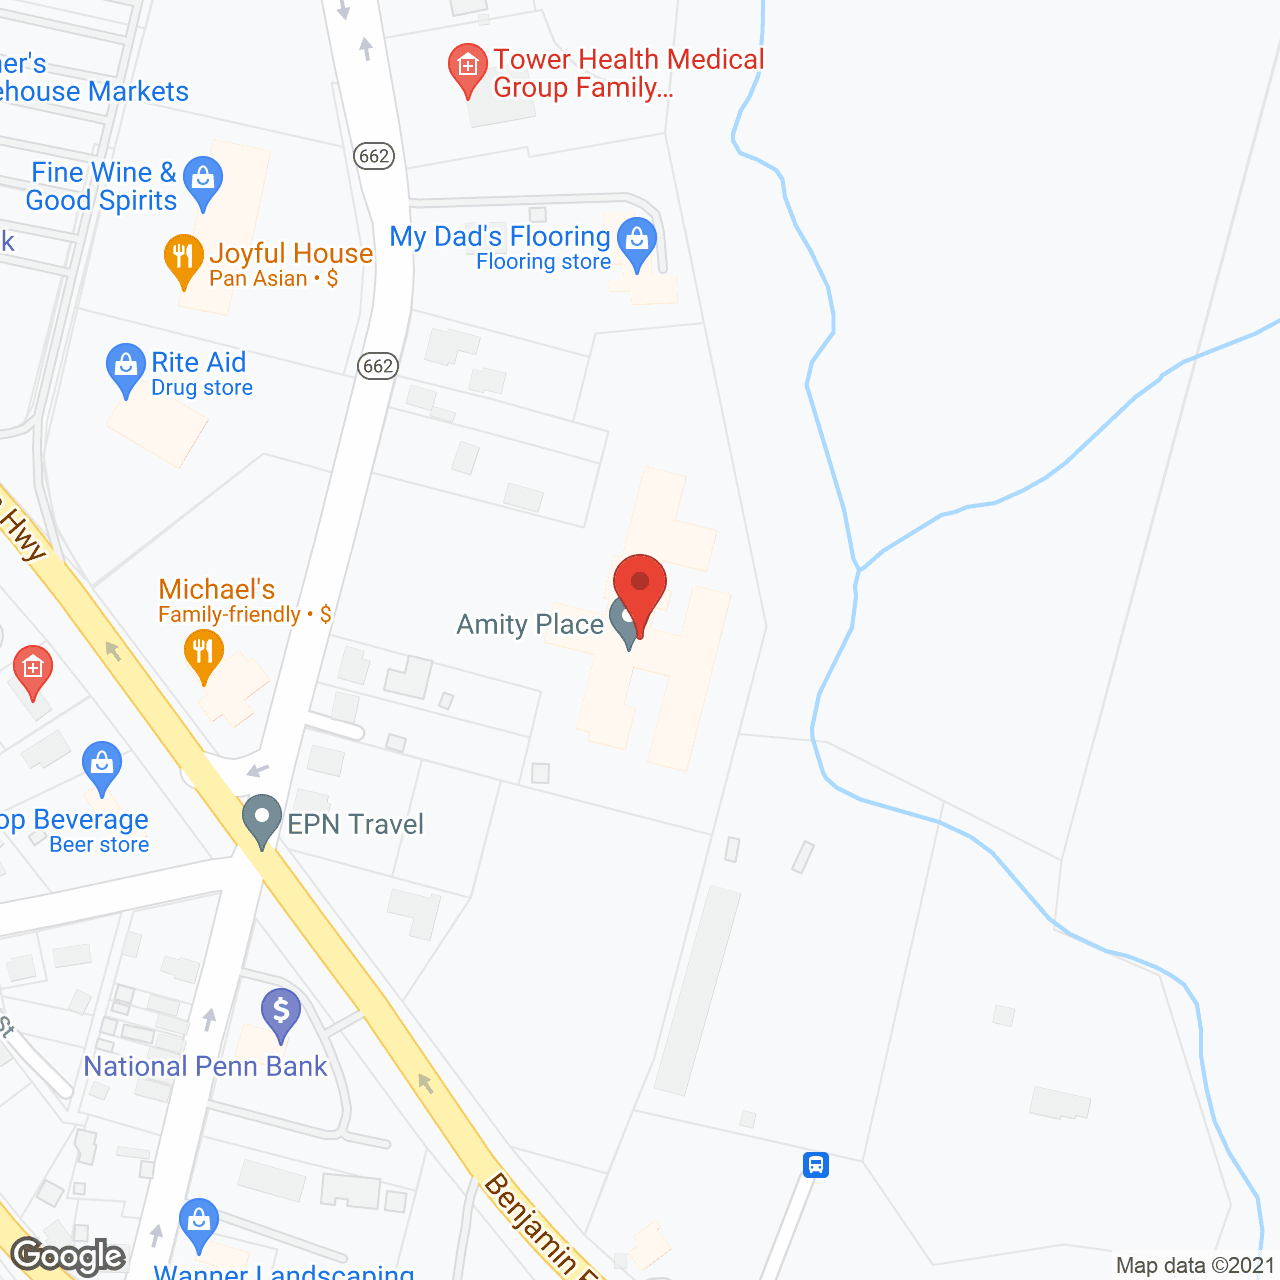 Amity Place in google map